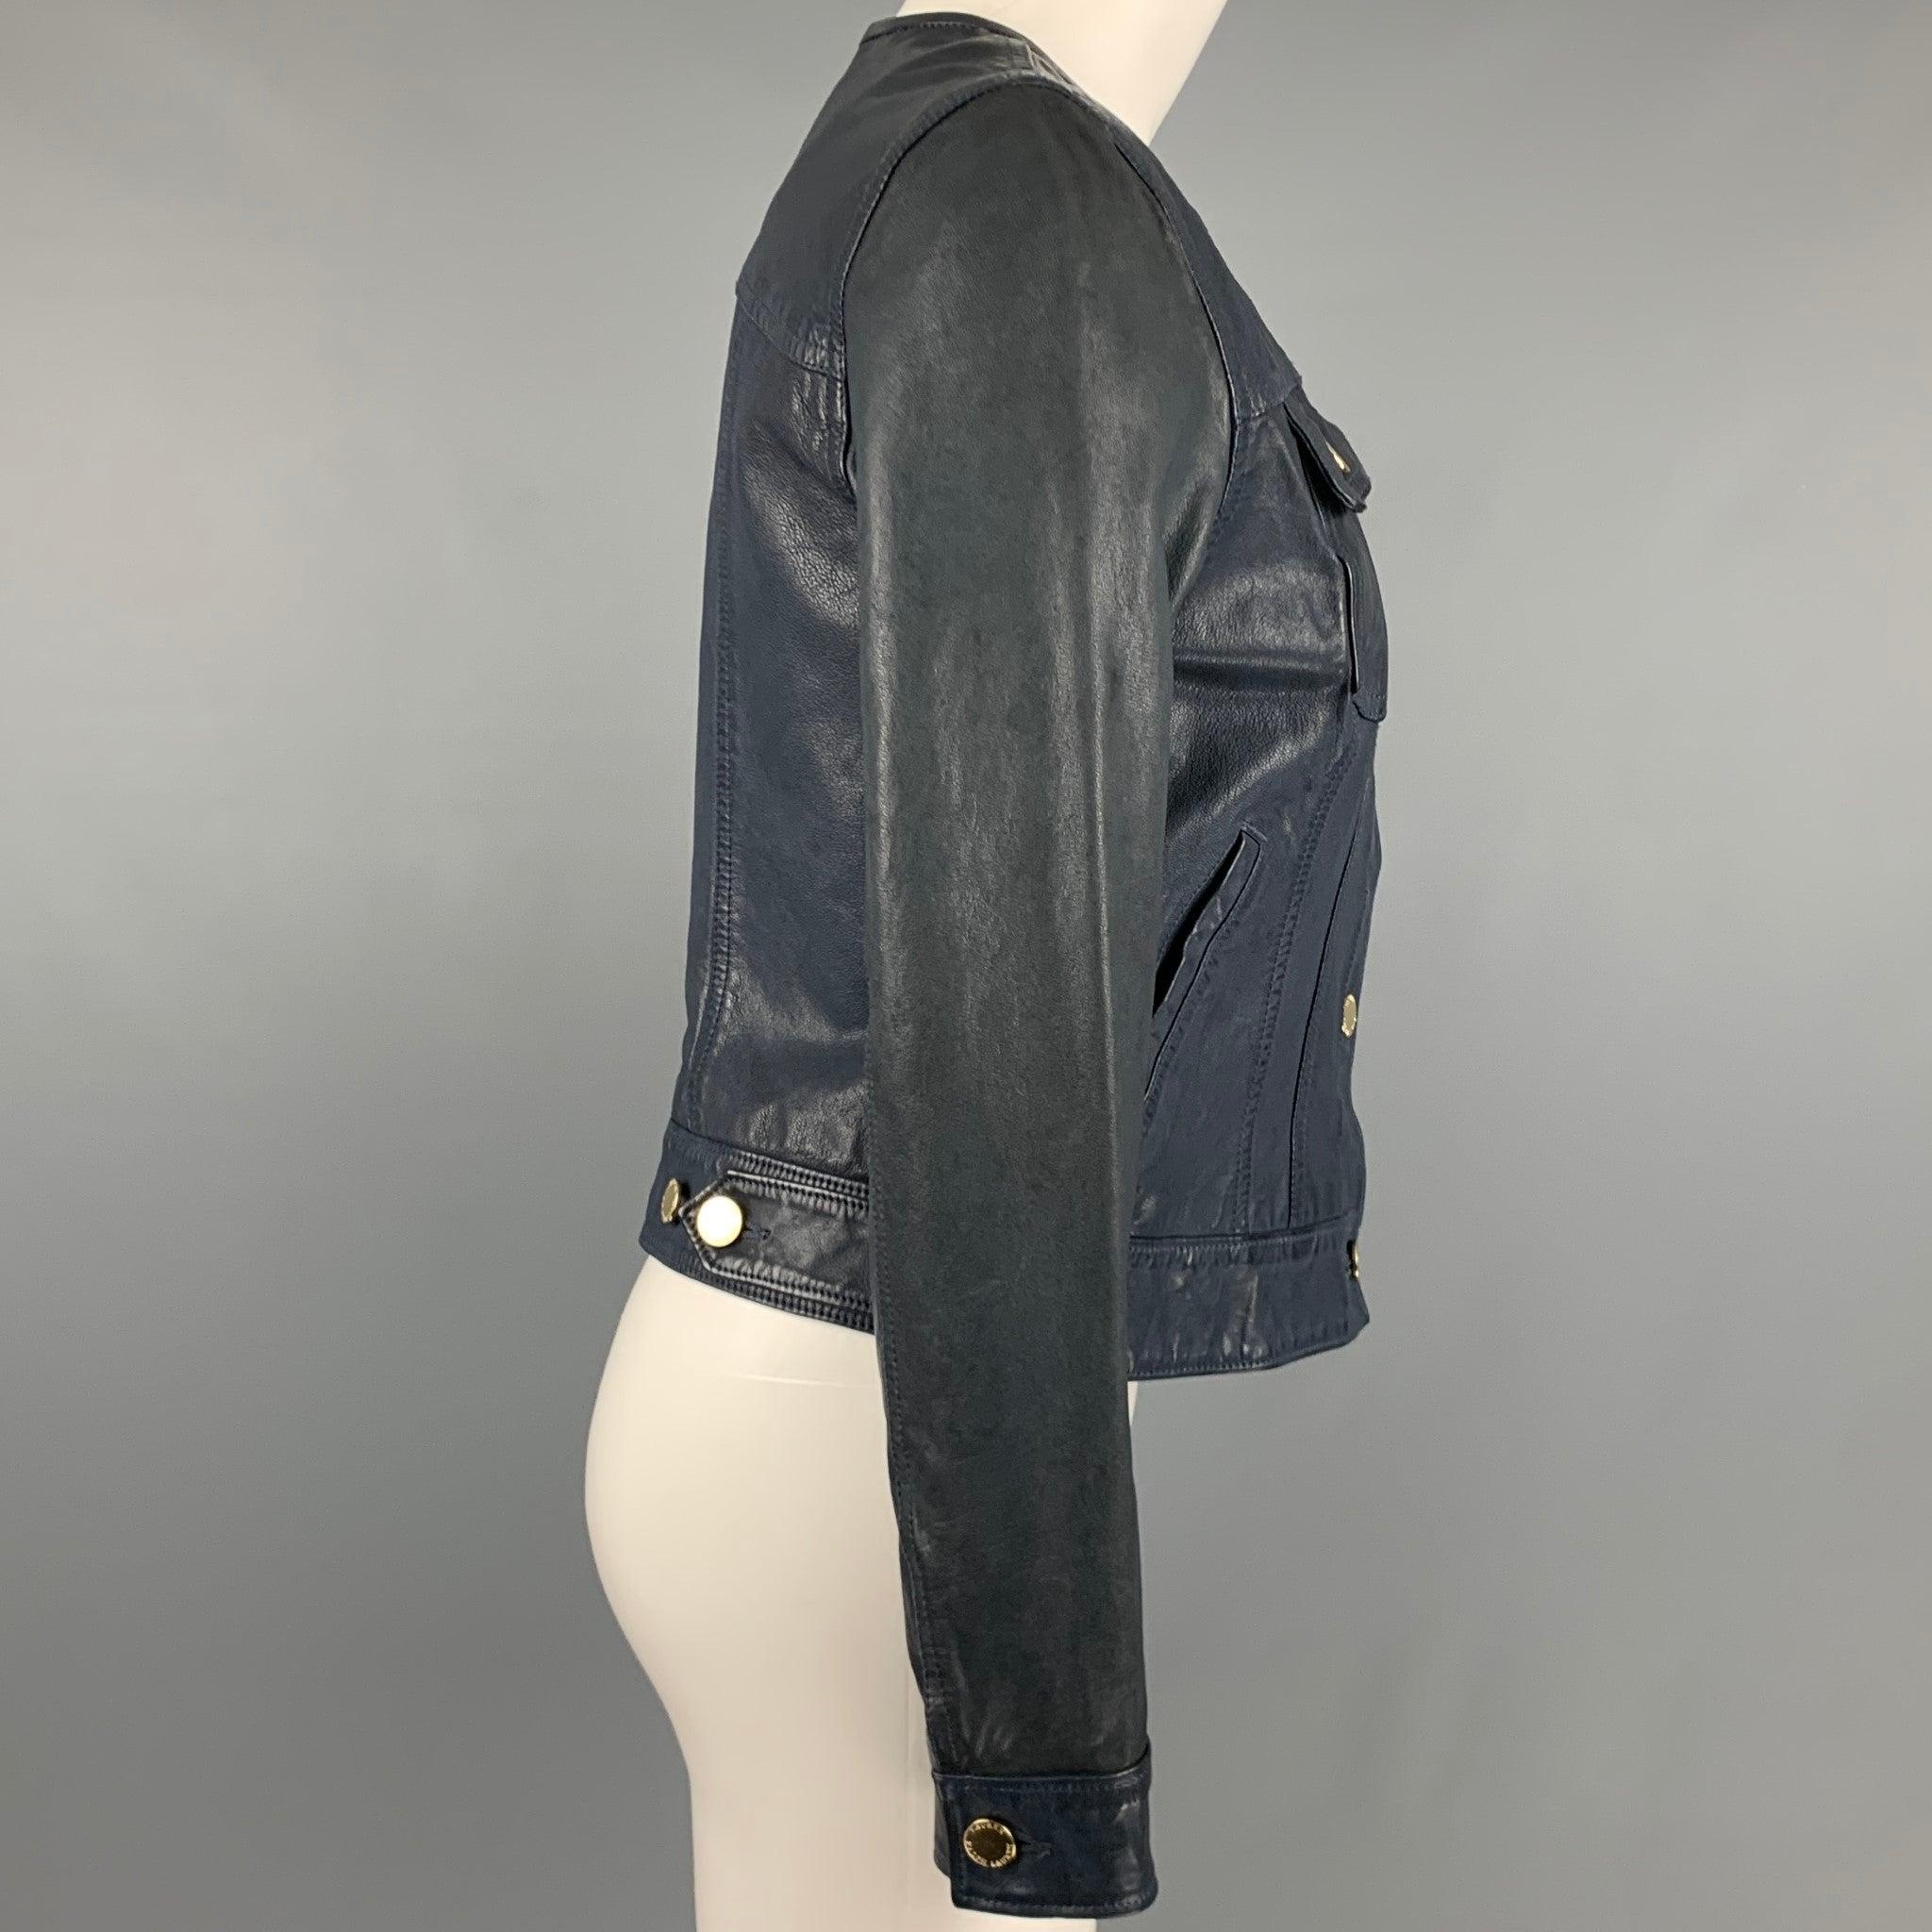 LAUREN by RALPH LAUREN jacket
in a navy leather fabric featuring a trucker style, gold tone buttons, and button closure. Excellent Pre-Owned Condition. 

Marked:   2 

Measurements: 
 
Shoulder: 14.5 inches Bust: 32 inches Sleeve: 24 inches Length: